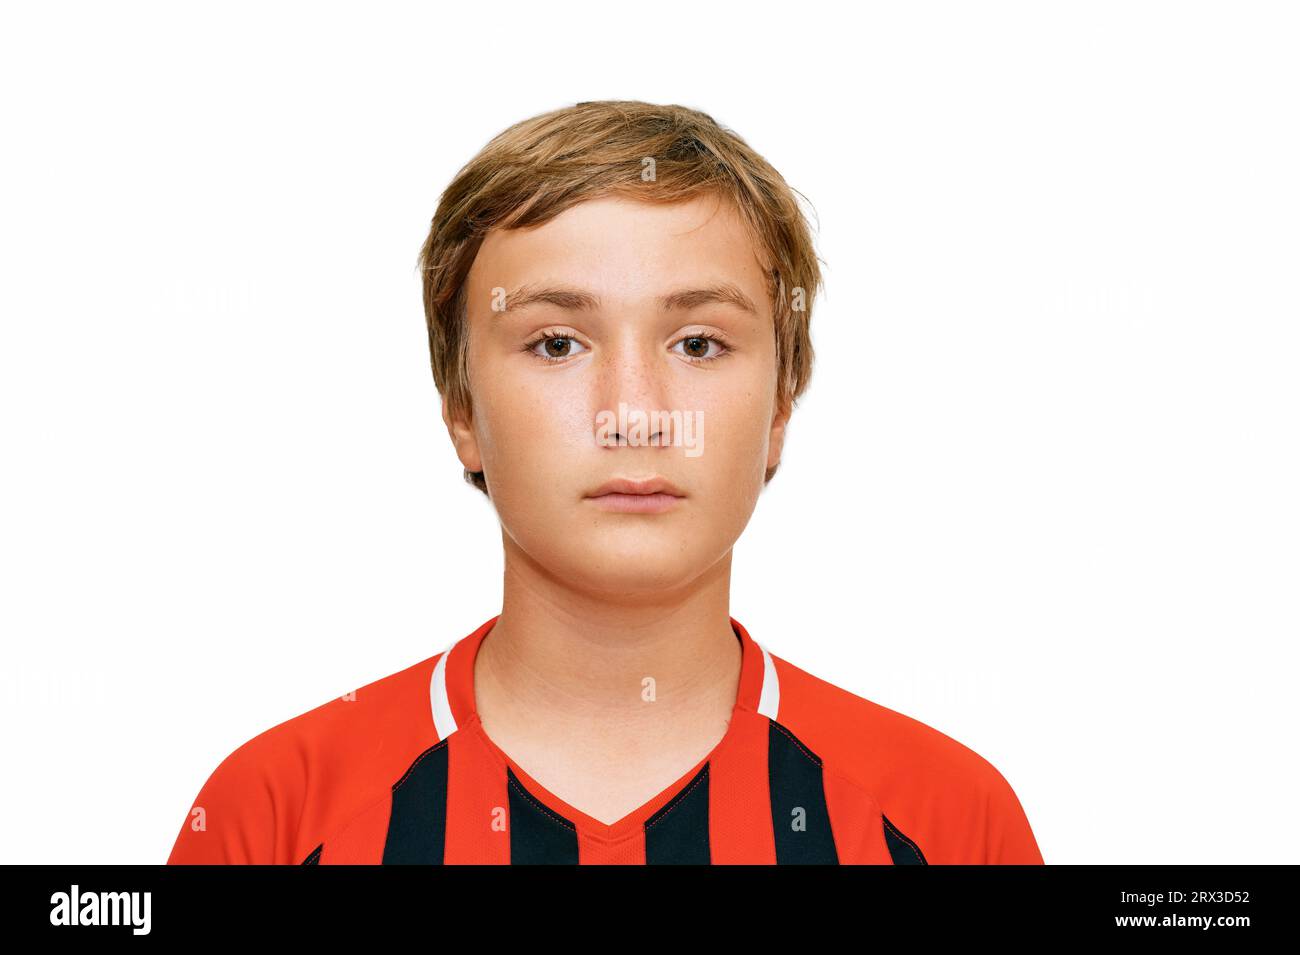 Close up portrait of young 12 - 13 years old teenager boy wearing football soccer uniform Stock Photo